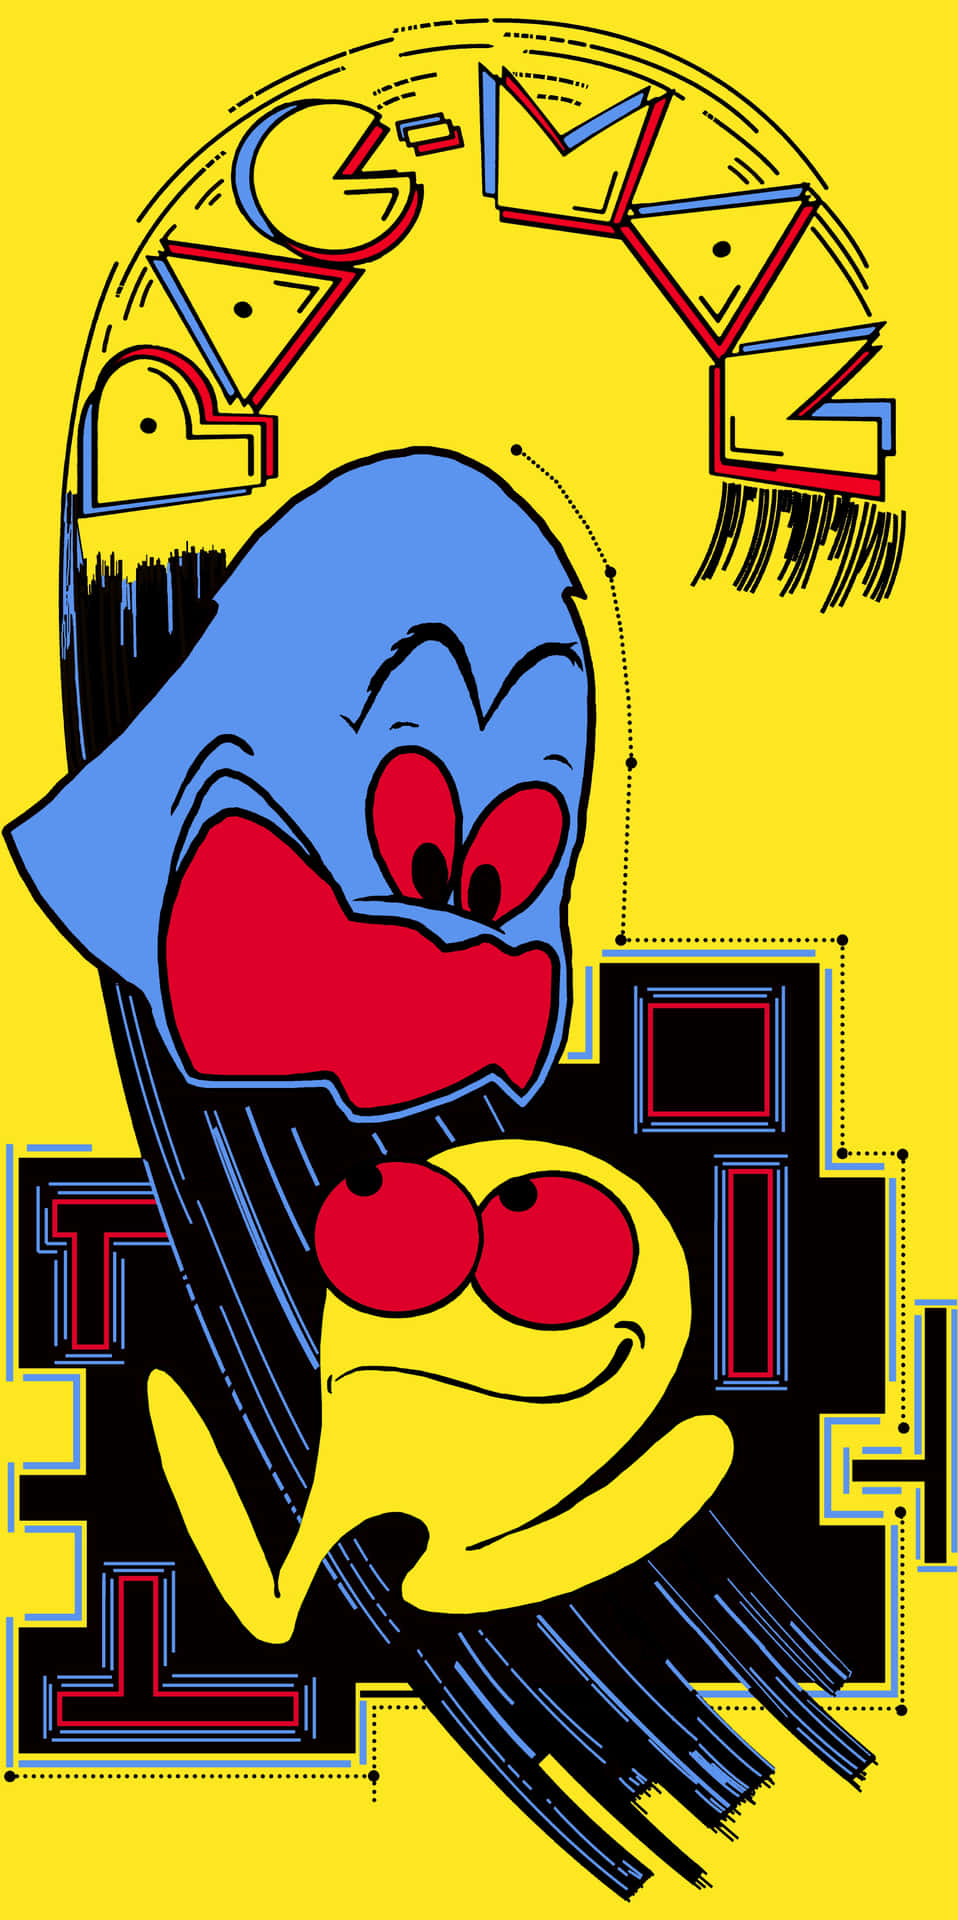 Iconic Pac-Man characters and maze